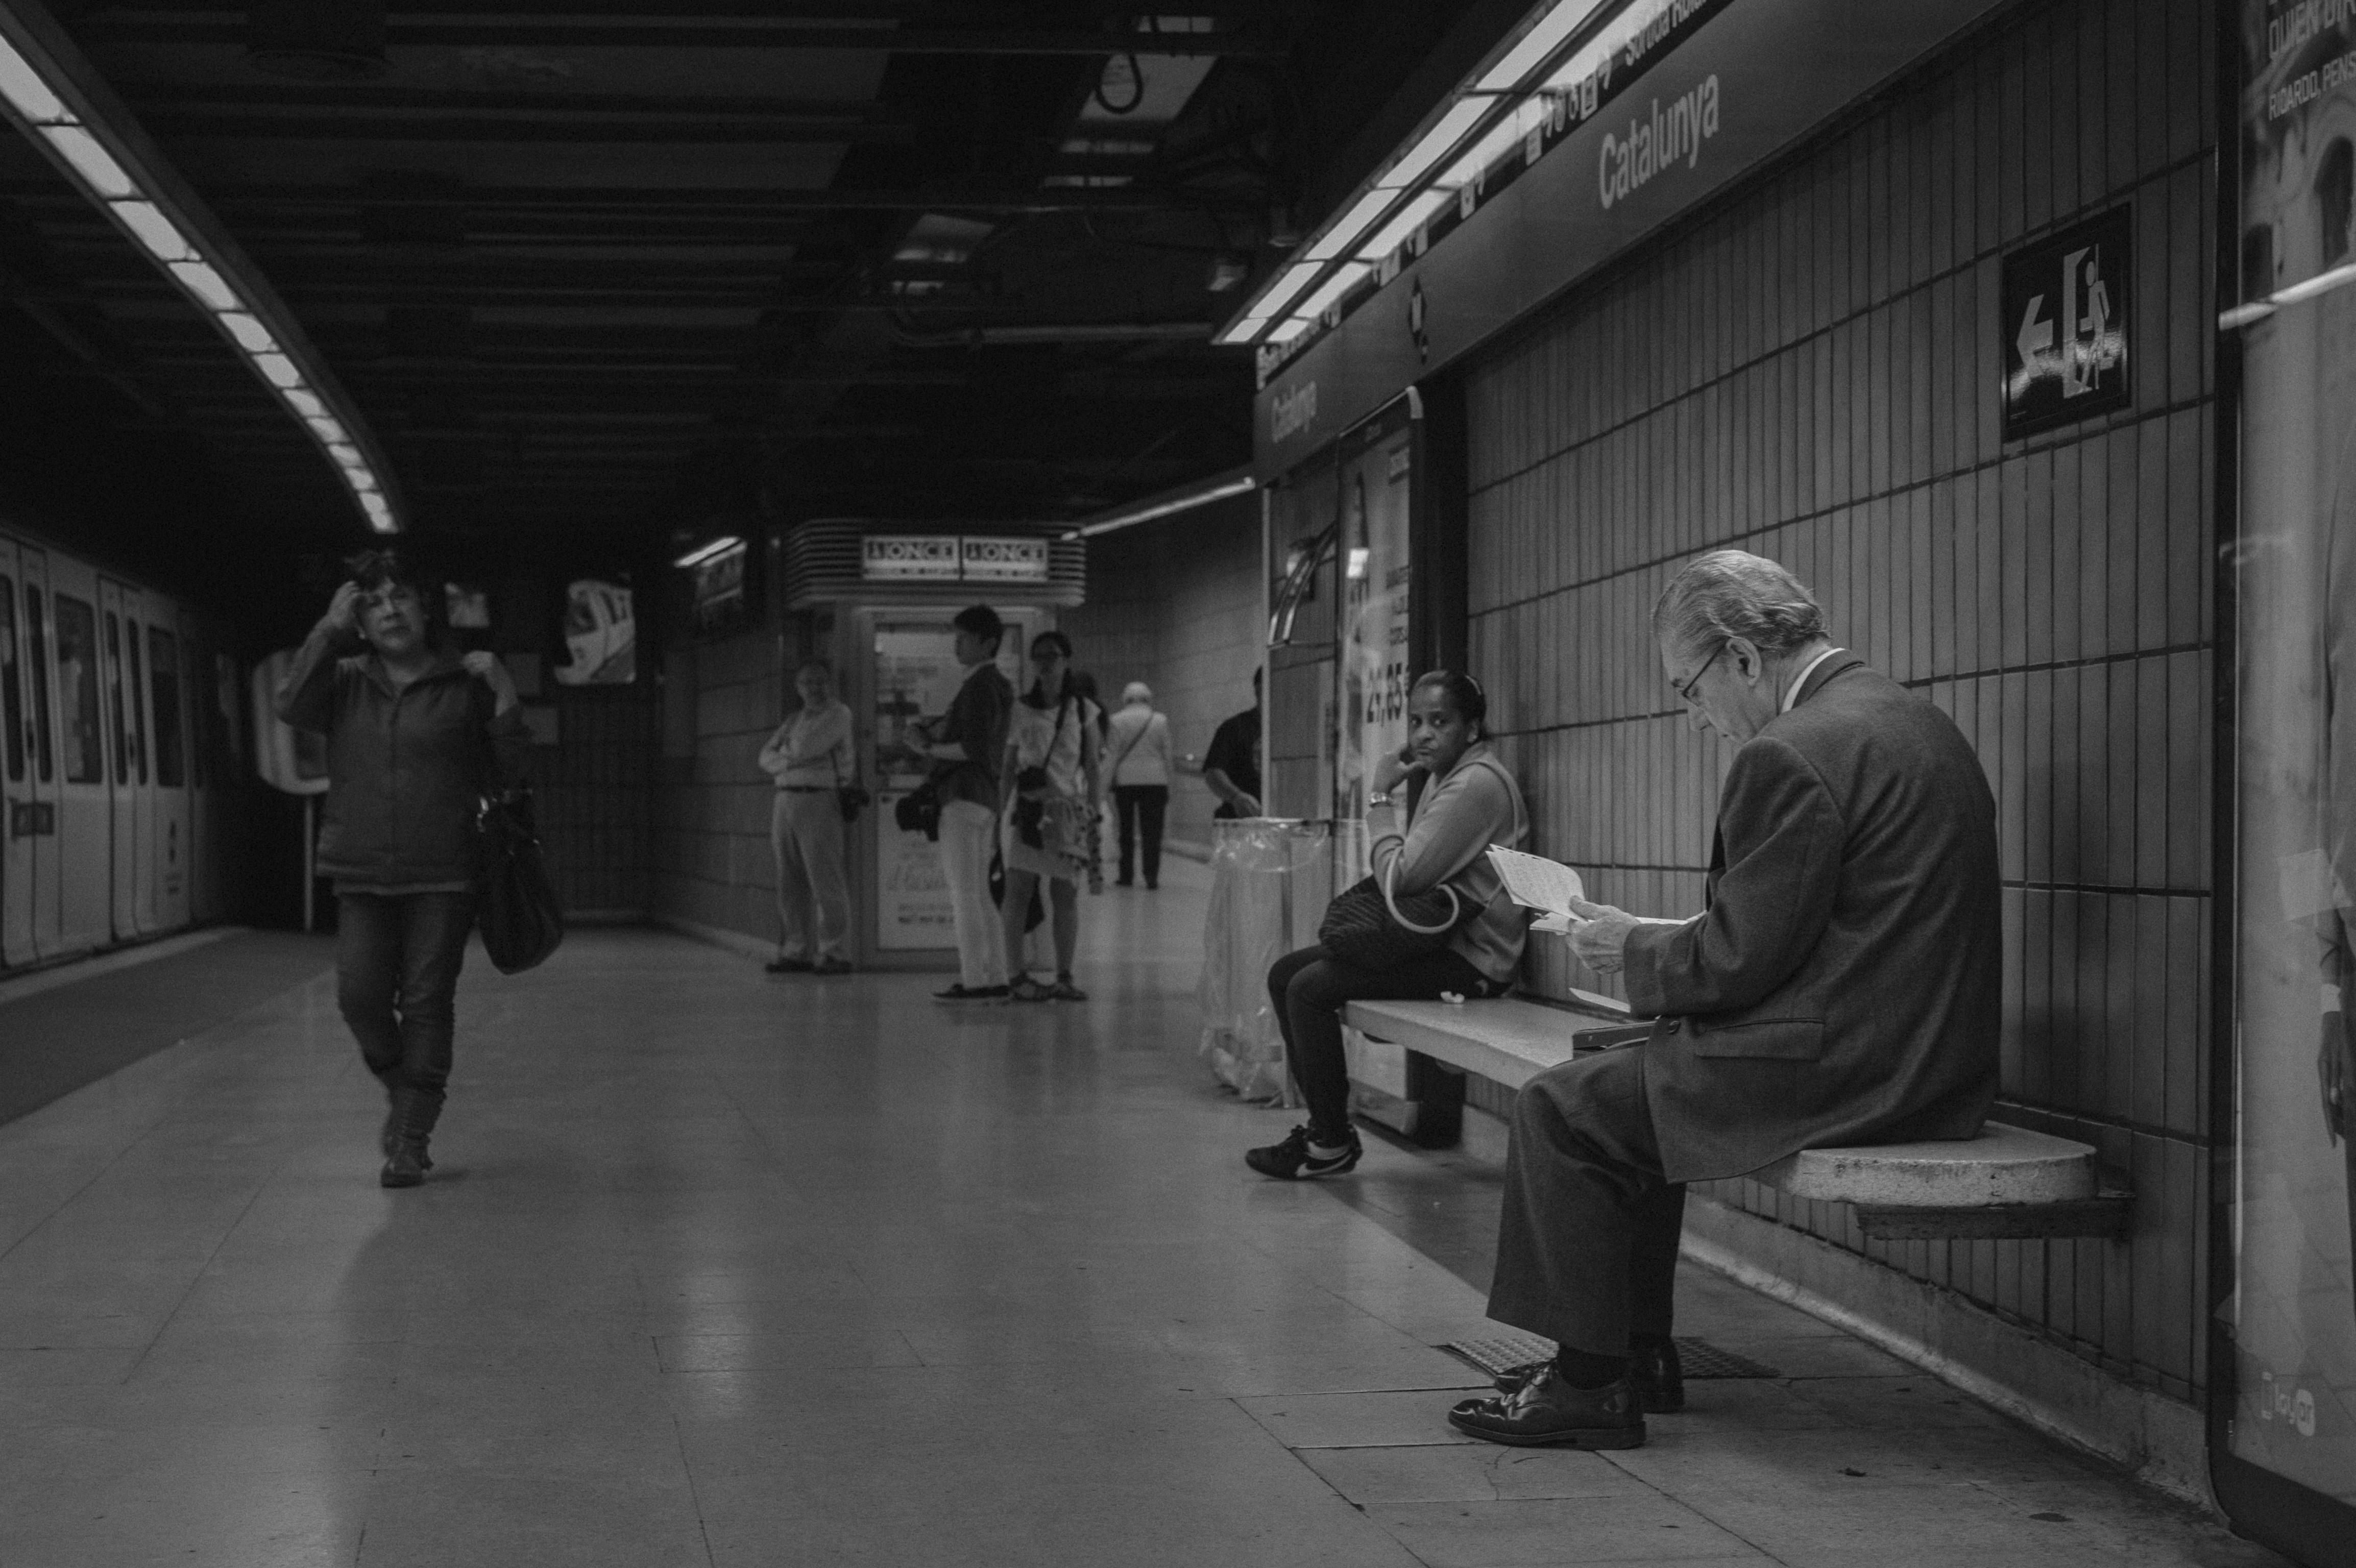 Man sits on a bench in the subway.